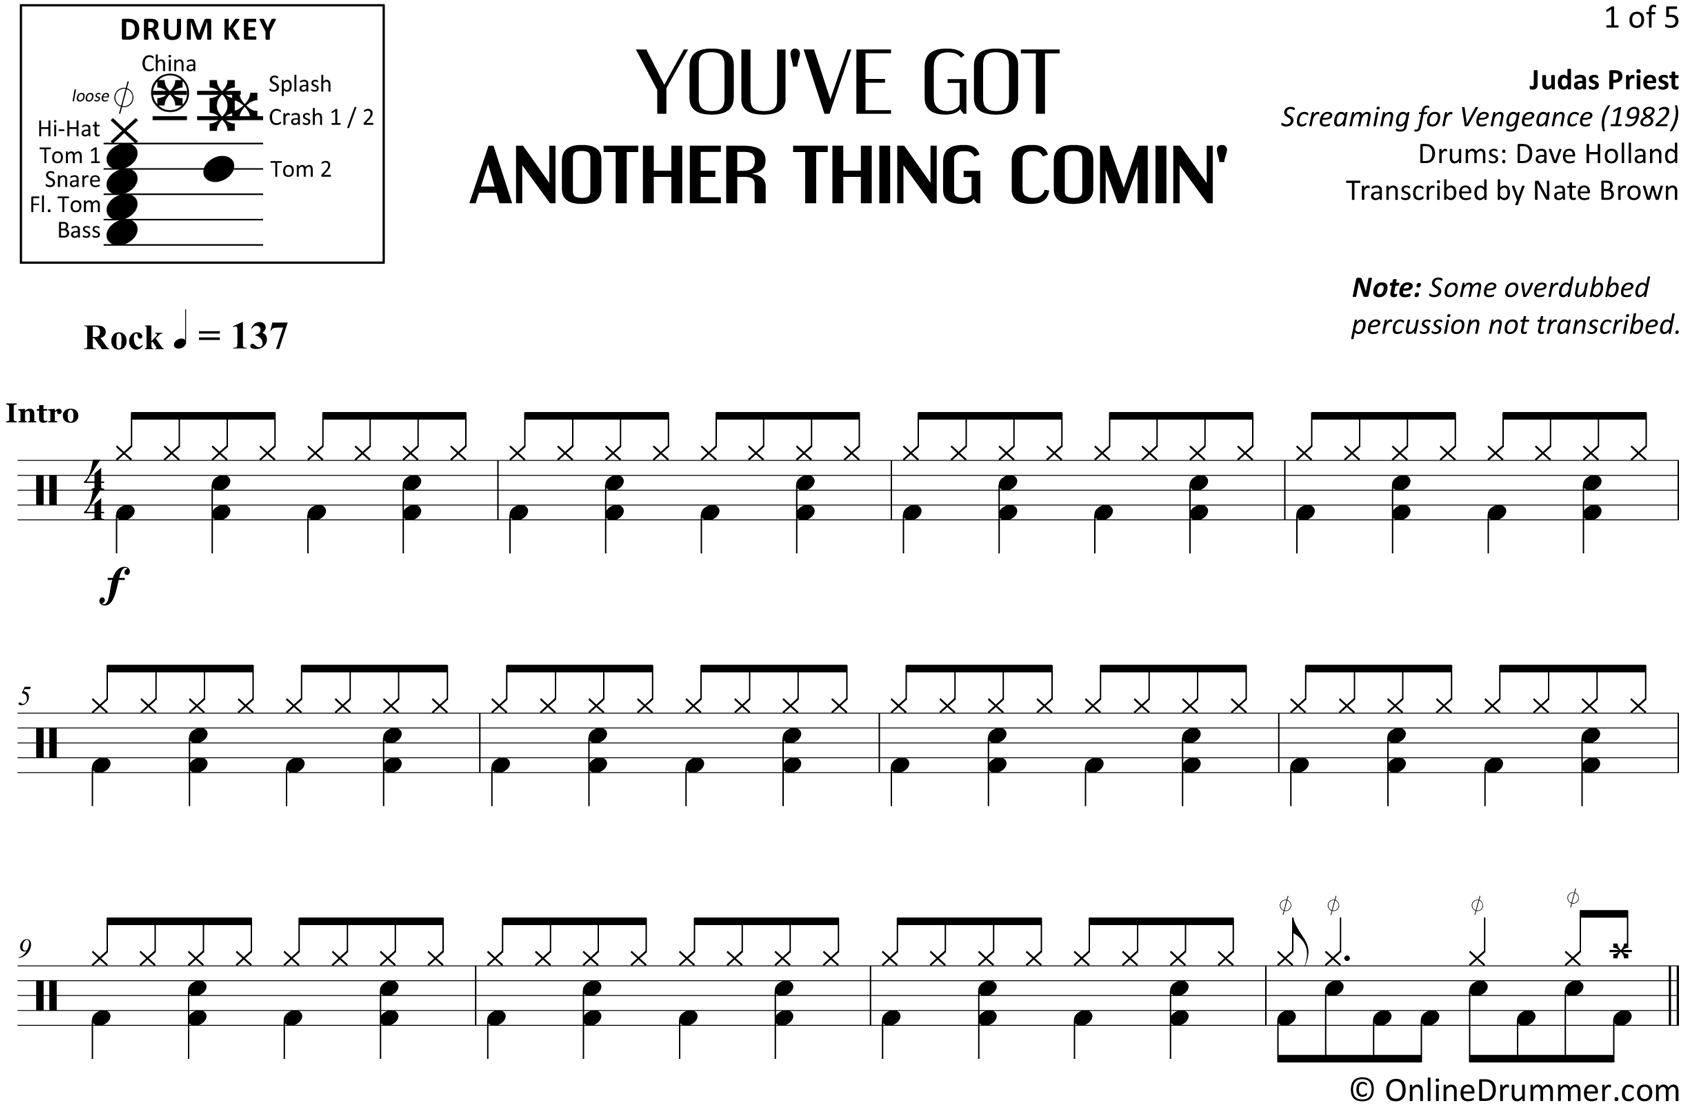 You've Got Another Thing Comin' - Judas Priest - Drum Sheet Music